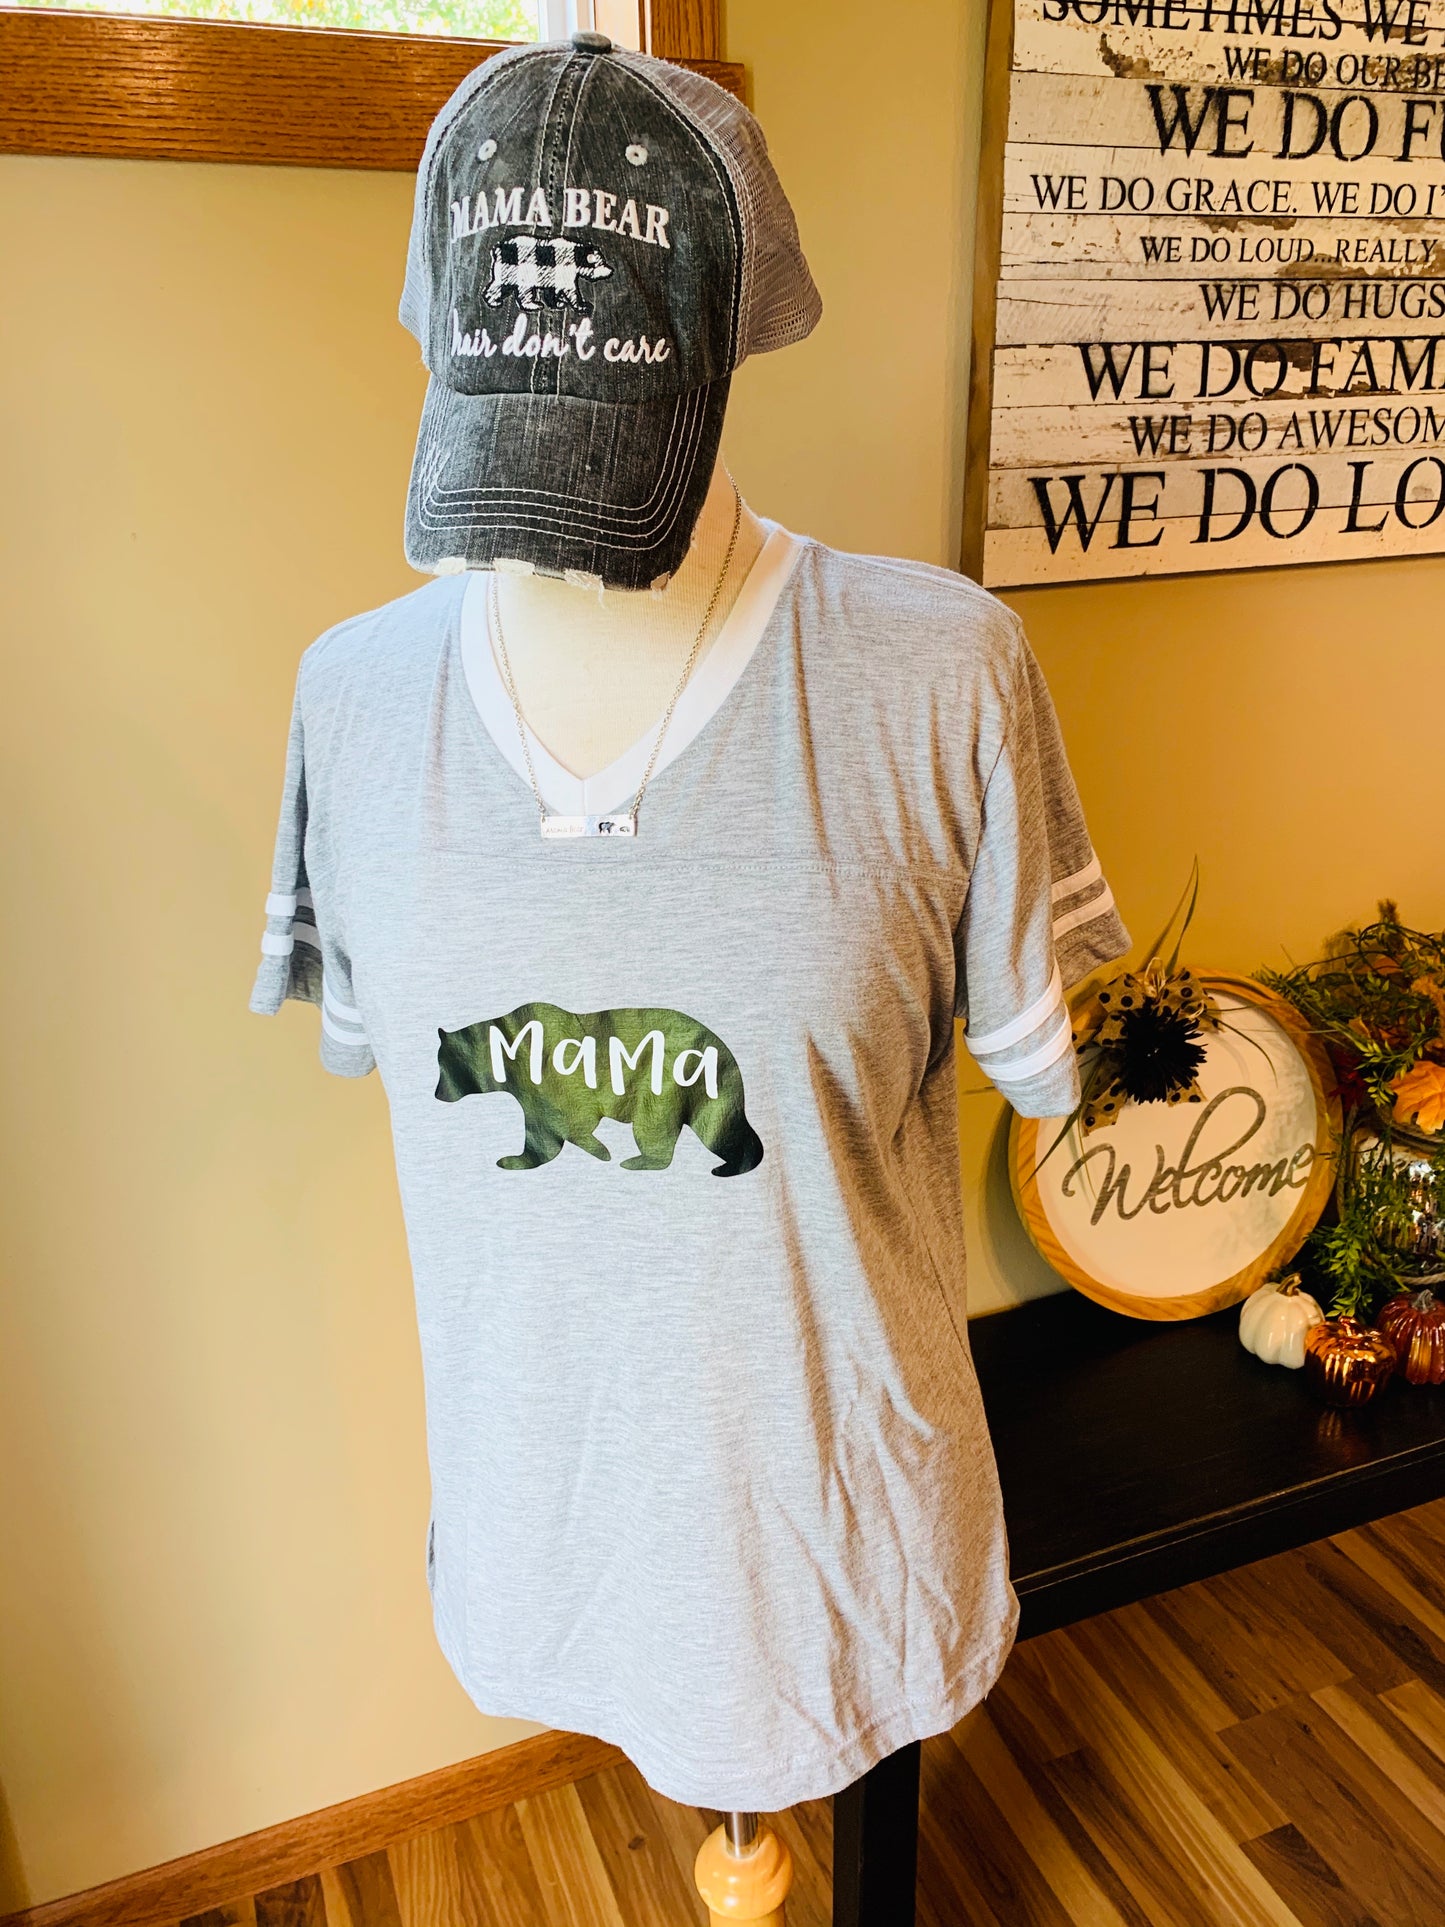 Hats, shirts, necklaces { Mama bear hair don't care. Gray with black and white buffalo plaid bear. Embroidered. Necklaces silver with option of bears. T-shirts XS - XL. - Stacy's Pink Martini Boutique